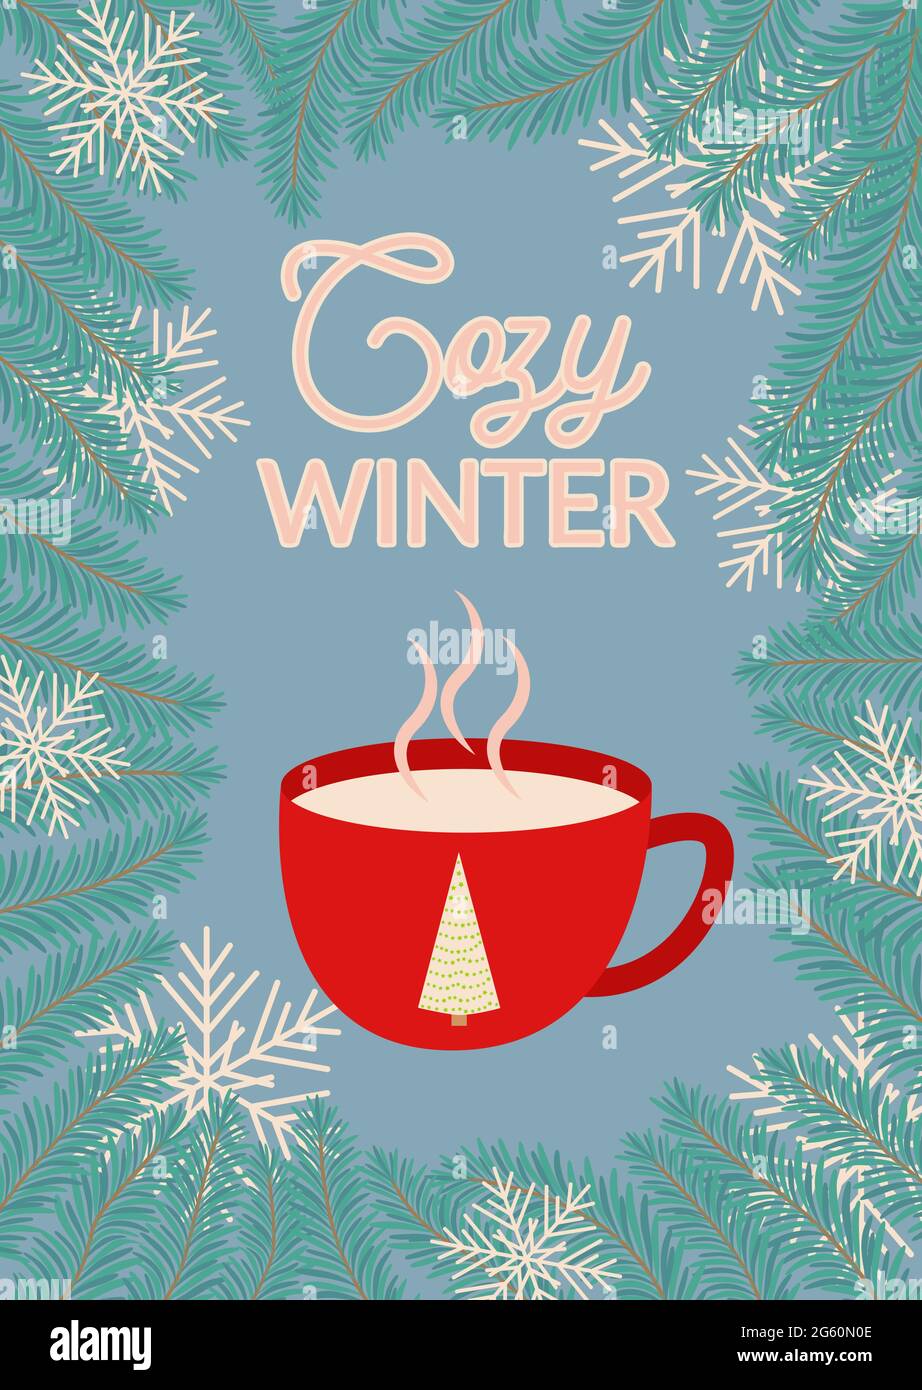 Christmas and Happy New Year templates. Trendy retro style. Lettering Cozy Winter Stock Vector